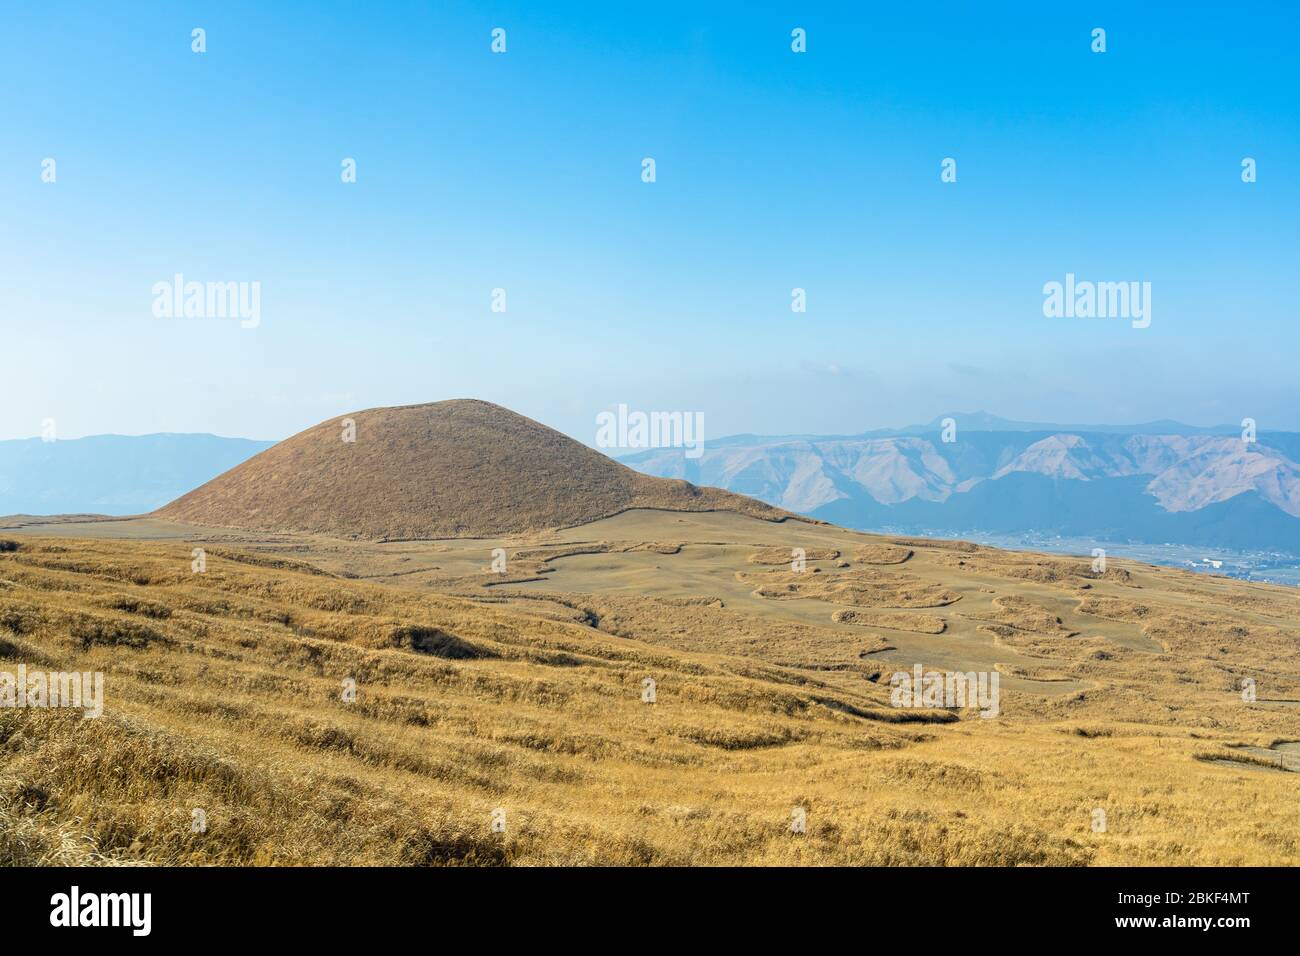 Komezuka In January A Volcanic Cone In Aso Kuju National Park A Grass Field Covers The Surrounding Area And The Surface Of It Kumamoto Prefecture Stock Photo Alamy